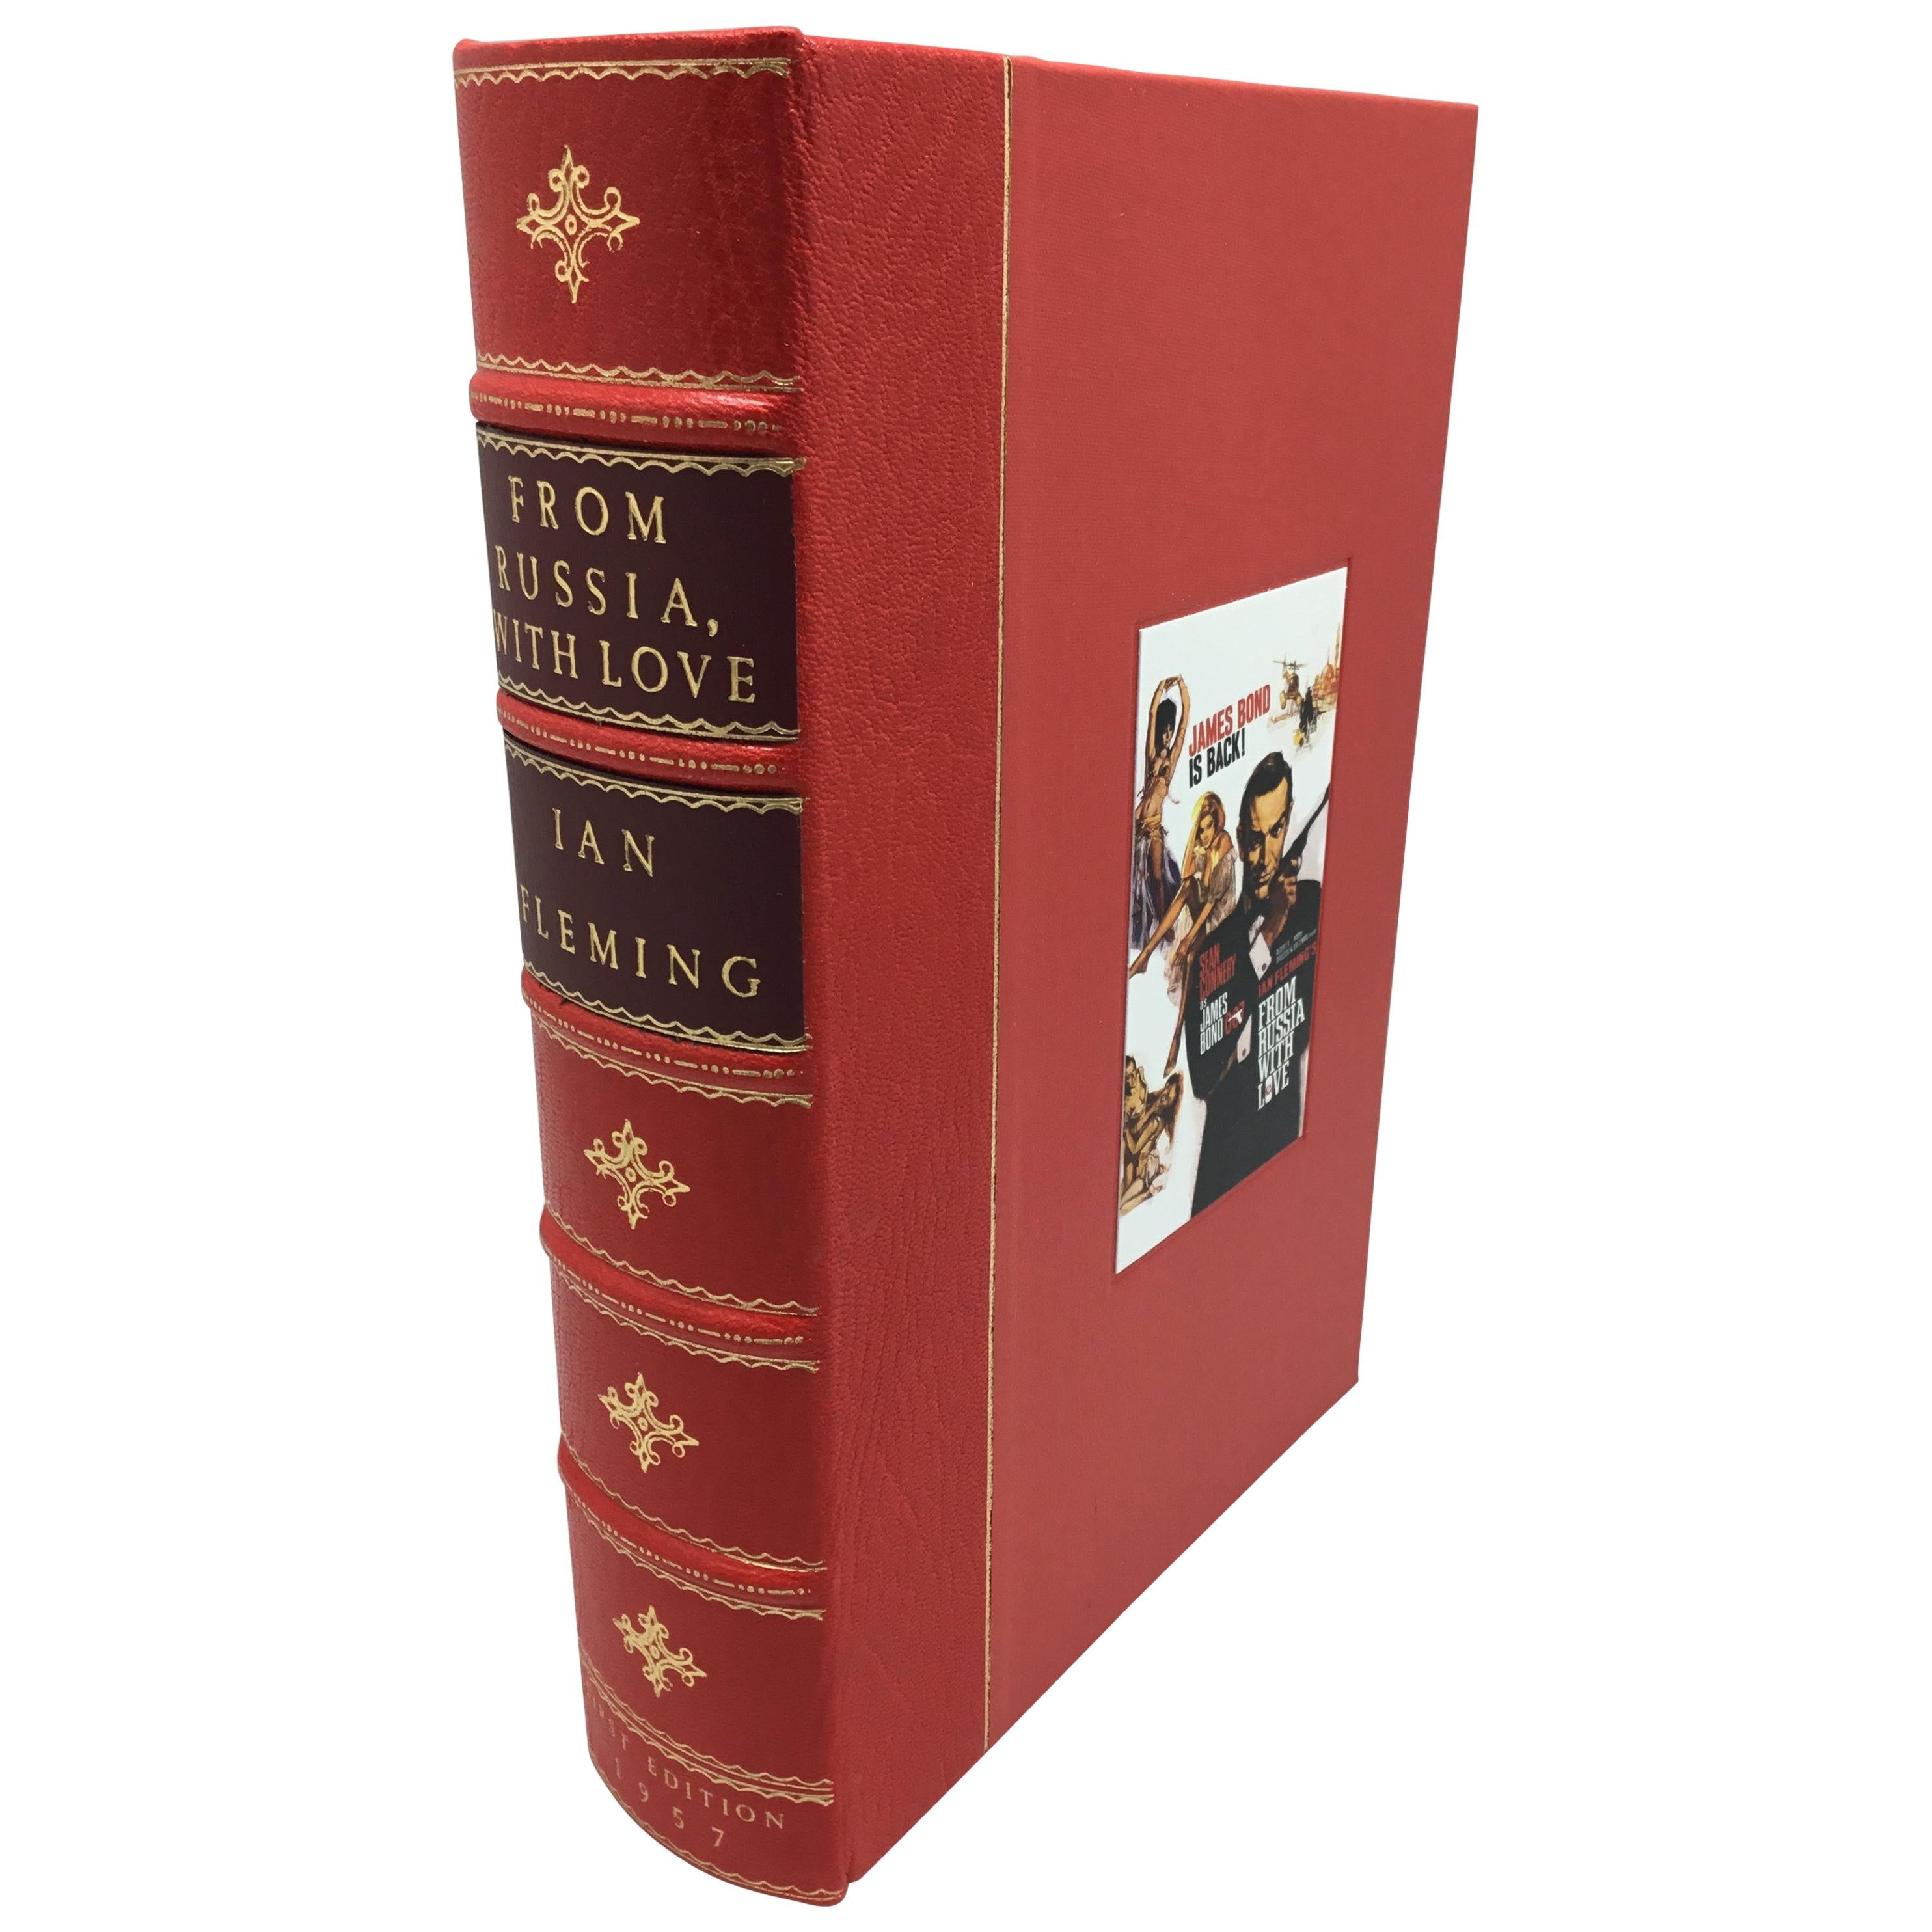 "From Russia with Love" by Ian Fleming, 1st Edition in Custom Leather Binding